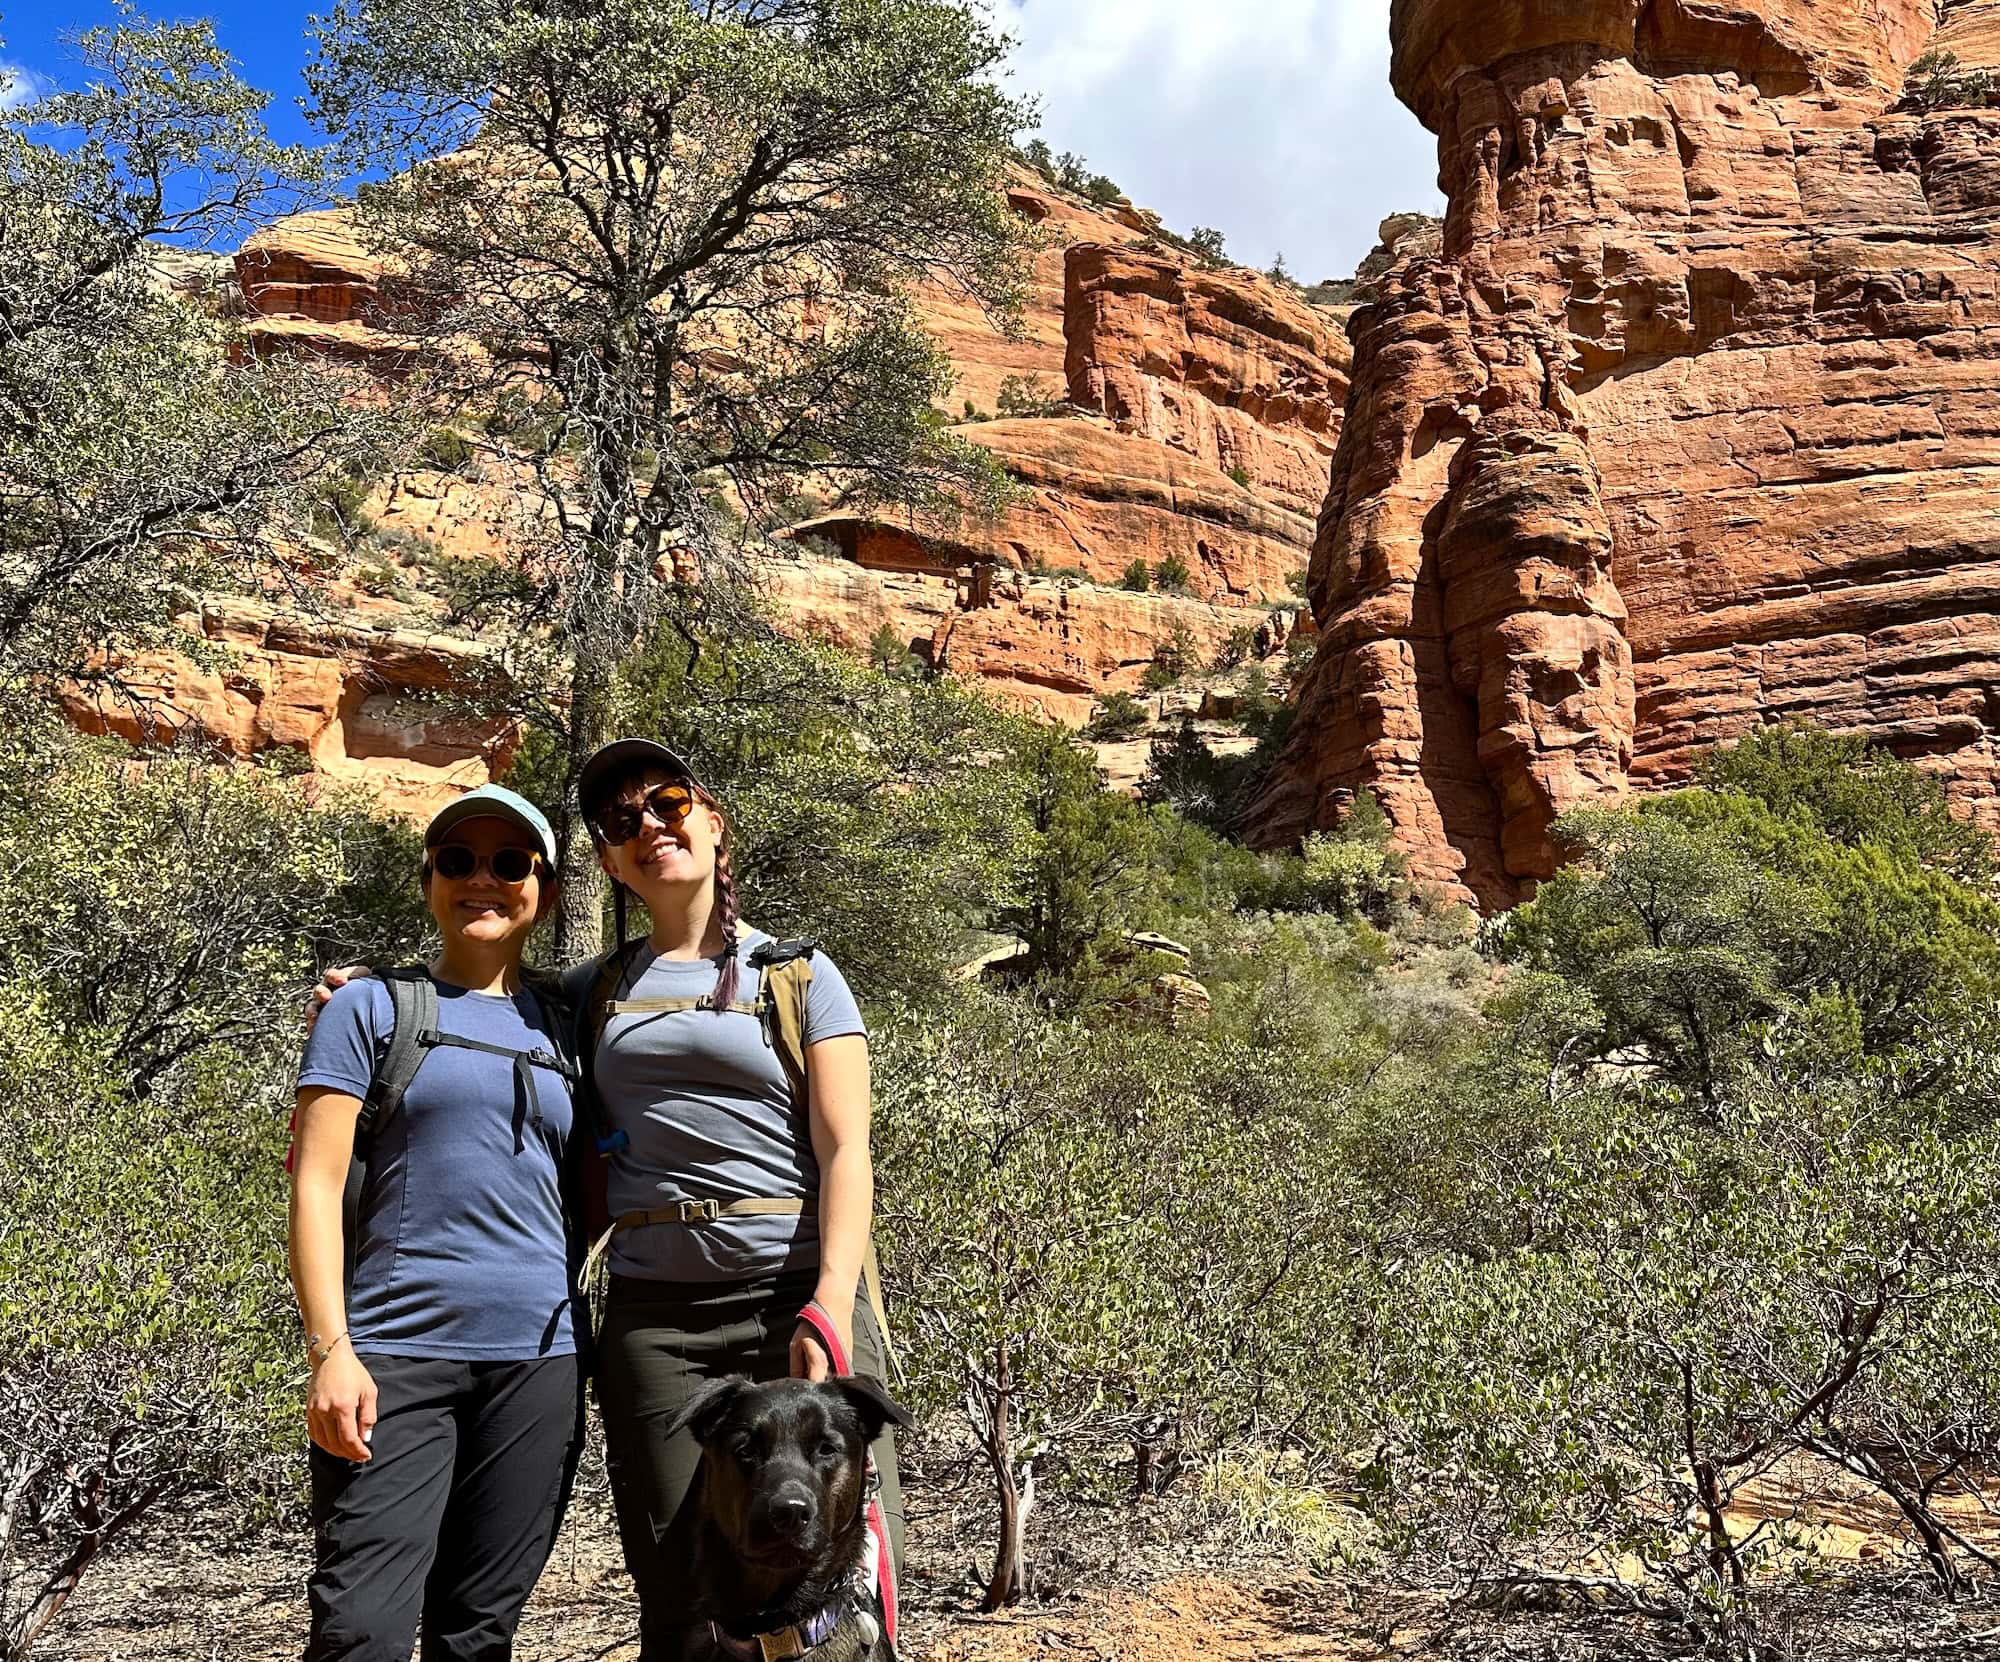 Emily and her friend hiking in Sedona